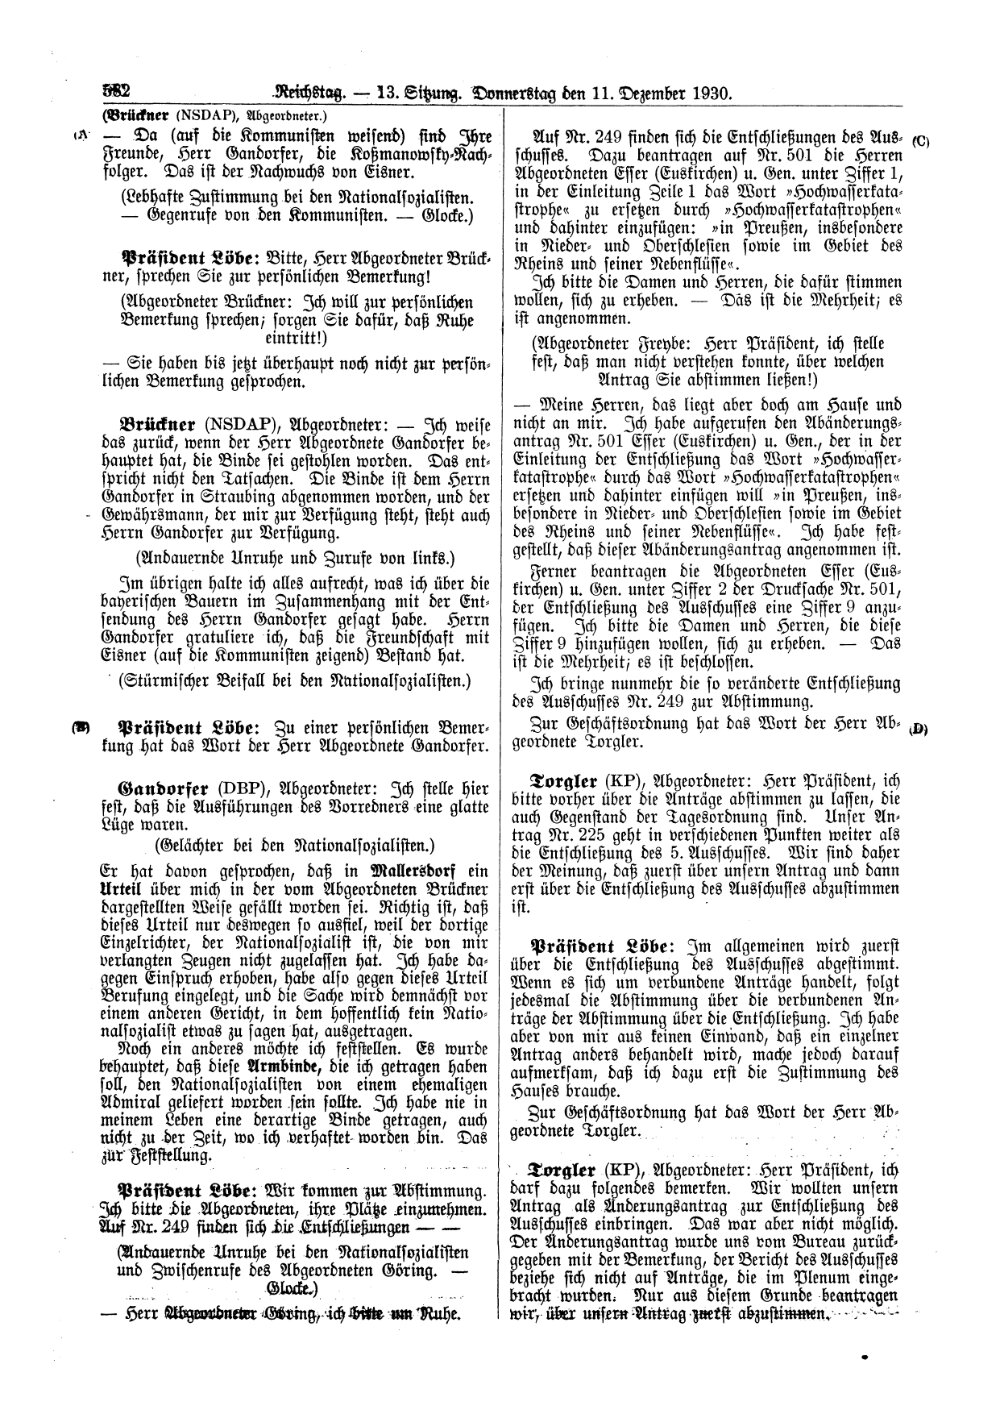 Scan of page 582